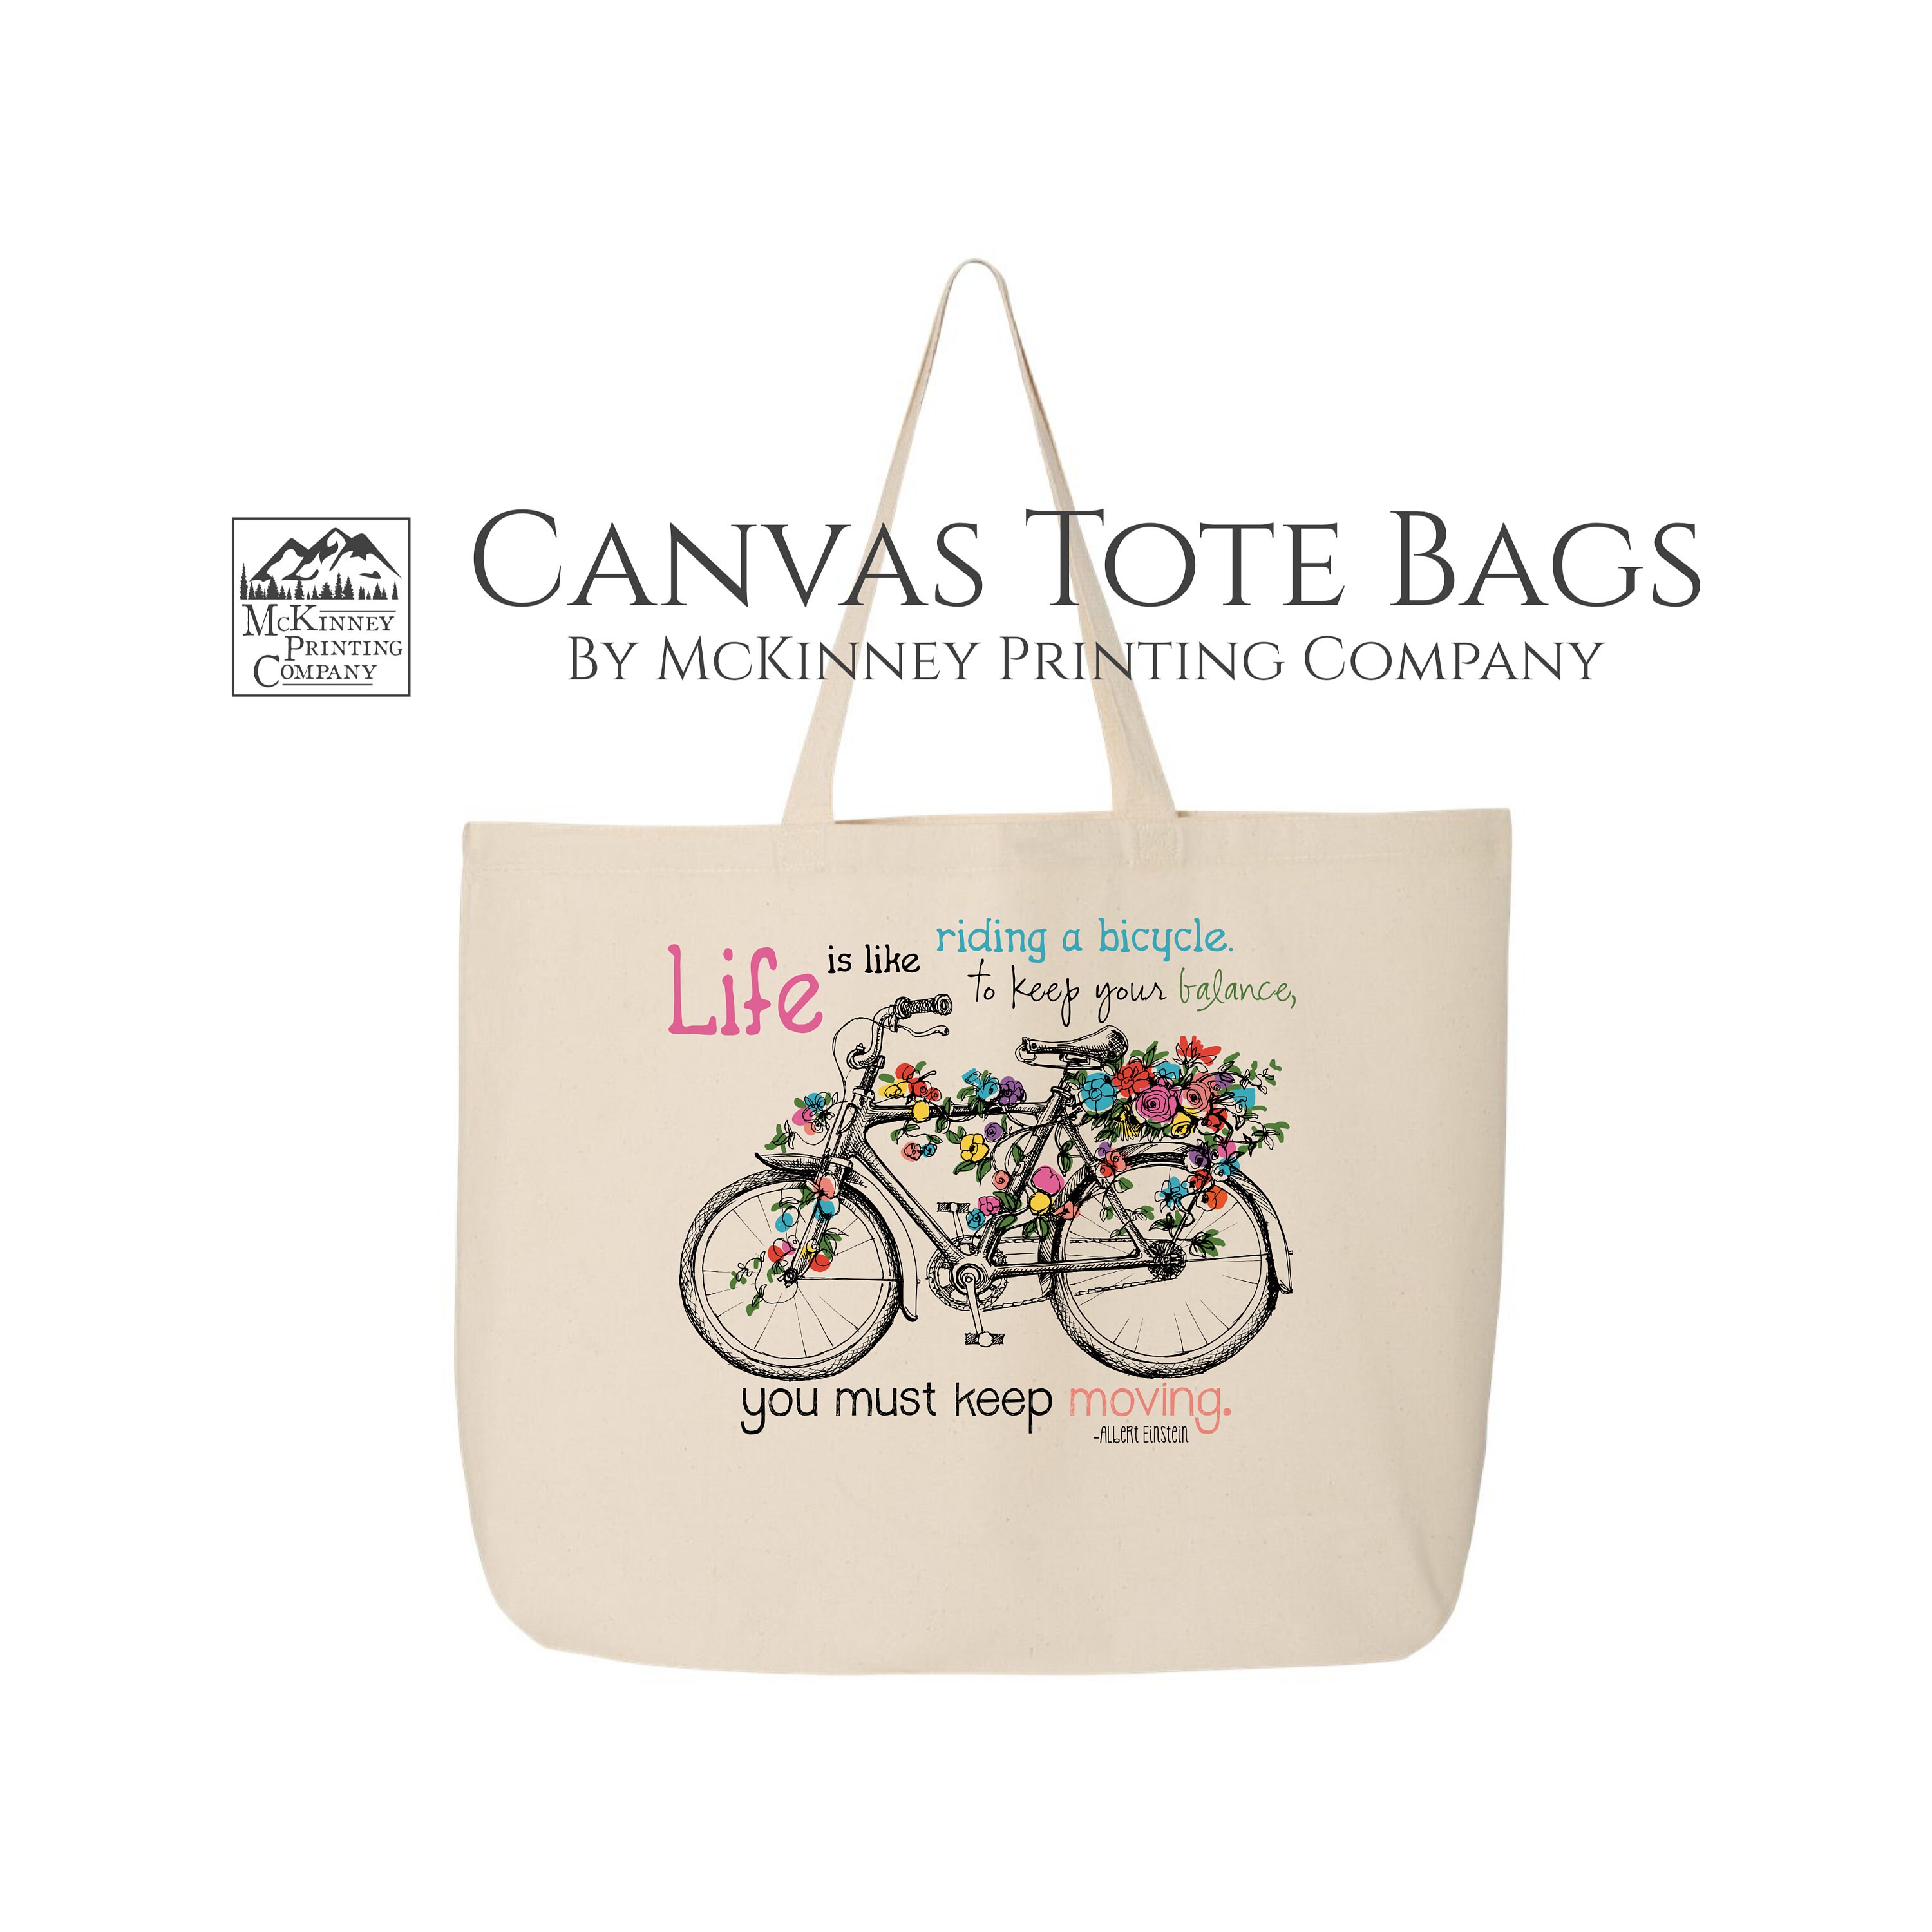  Large Capacity Tote Bag S706 (beige) : Clothing, Shoes